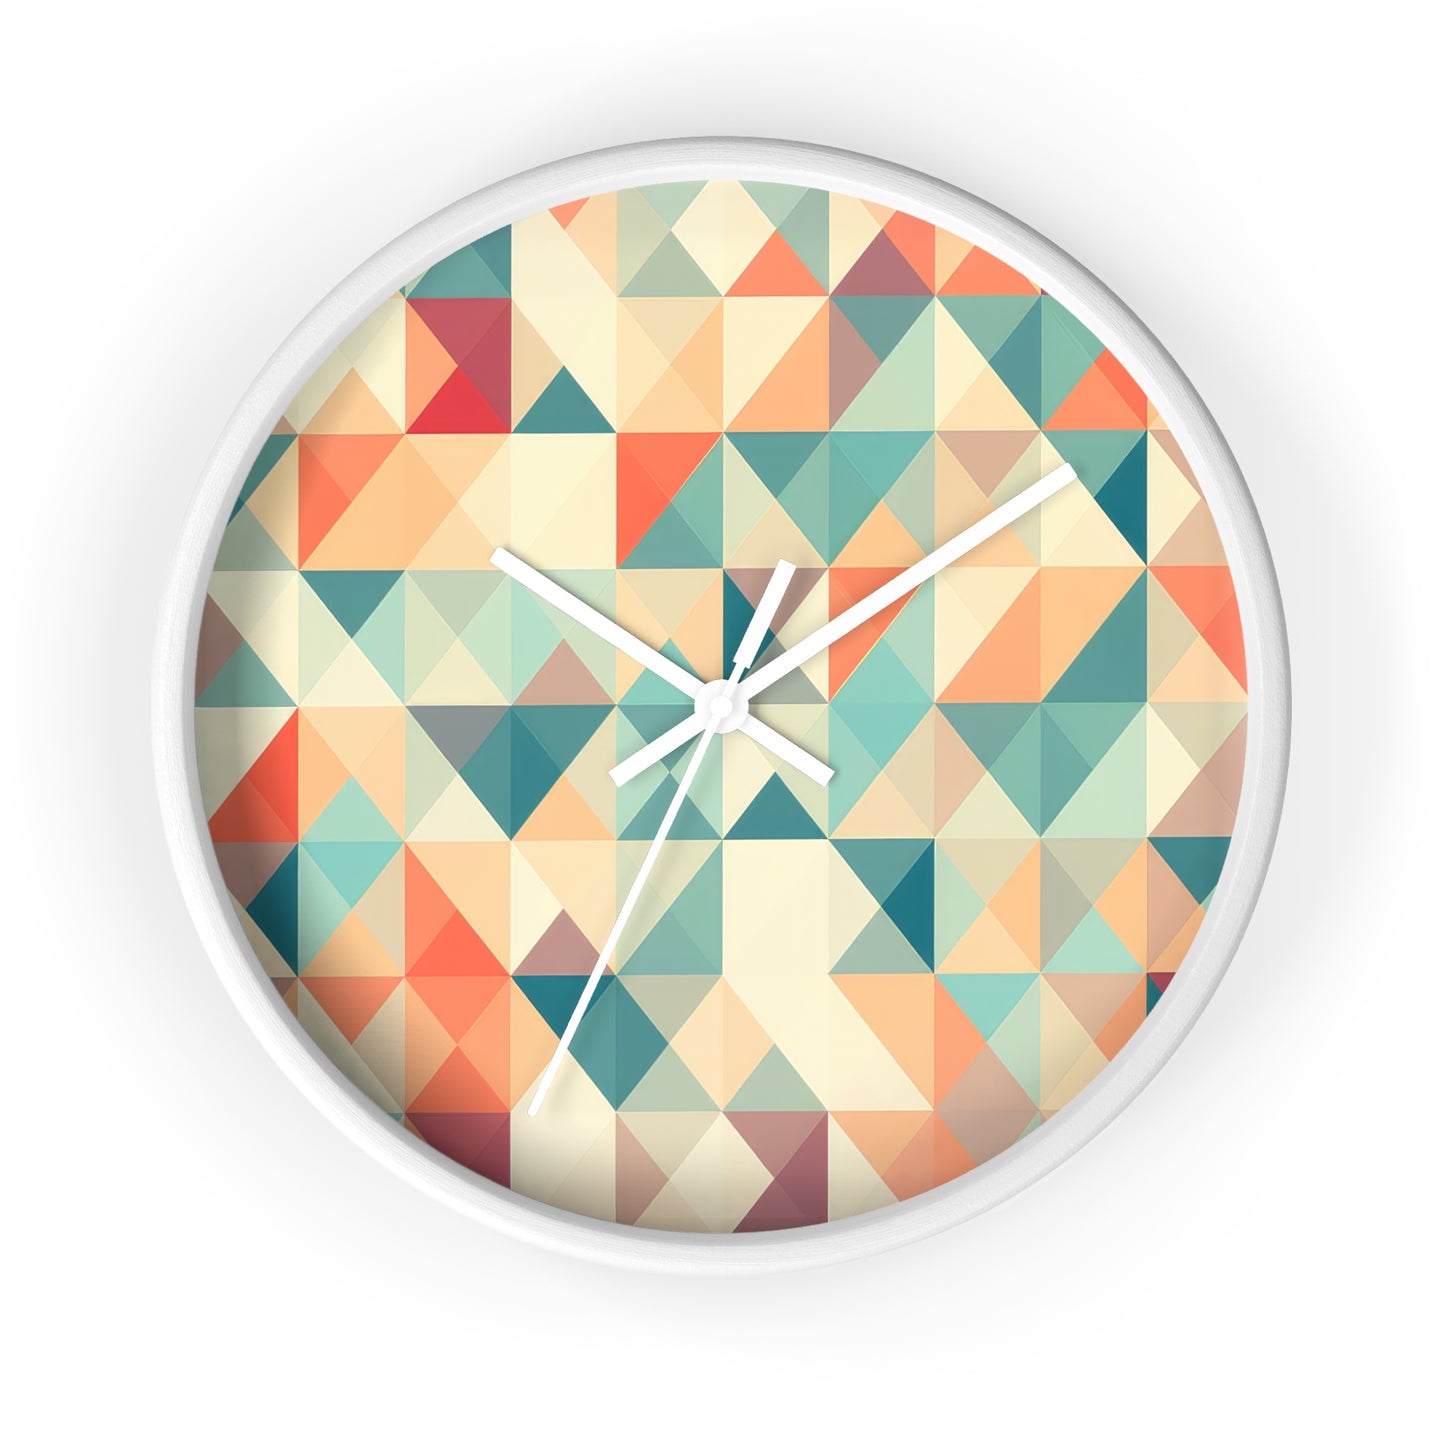 Tranquil Mosaic Design Wall Clock, an artful tile-inspired timepiece perfect for contemporary design wall clock enthusiasts, showcasing unique mosaic embellishments and precision time-telling features for chic home accessories.